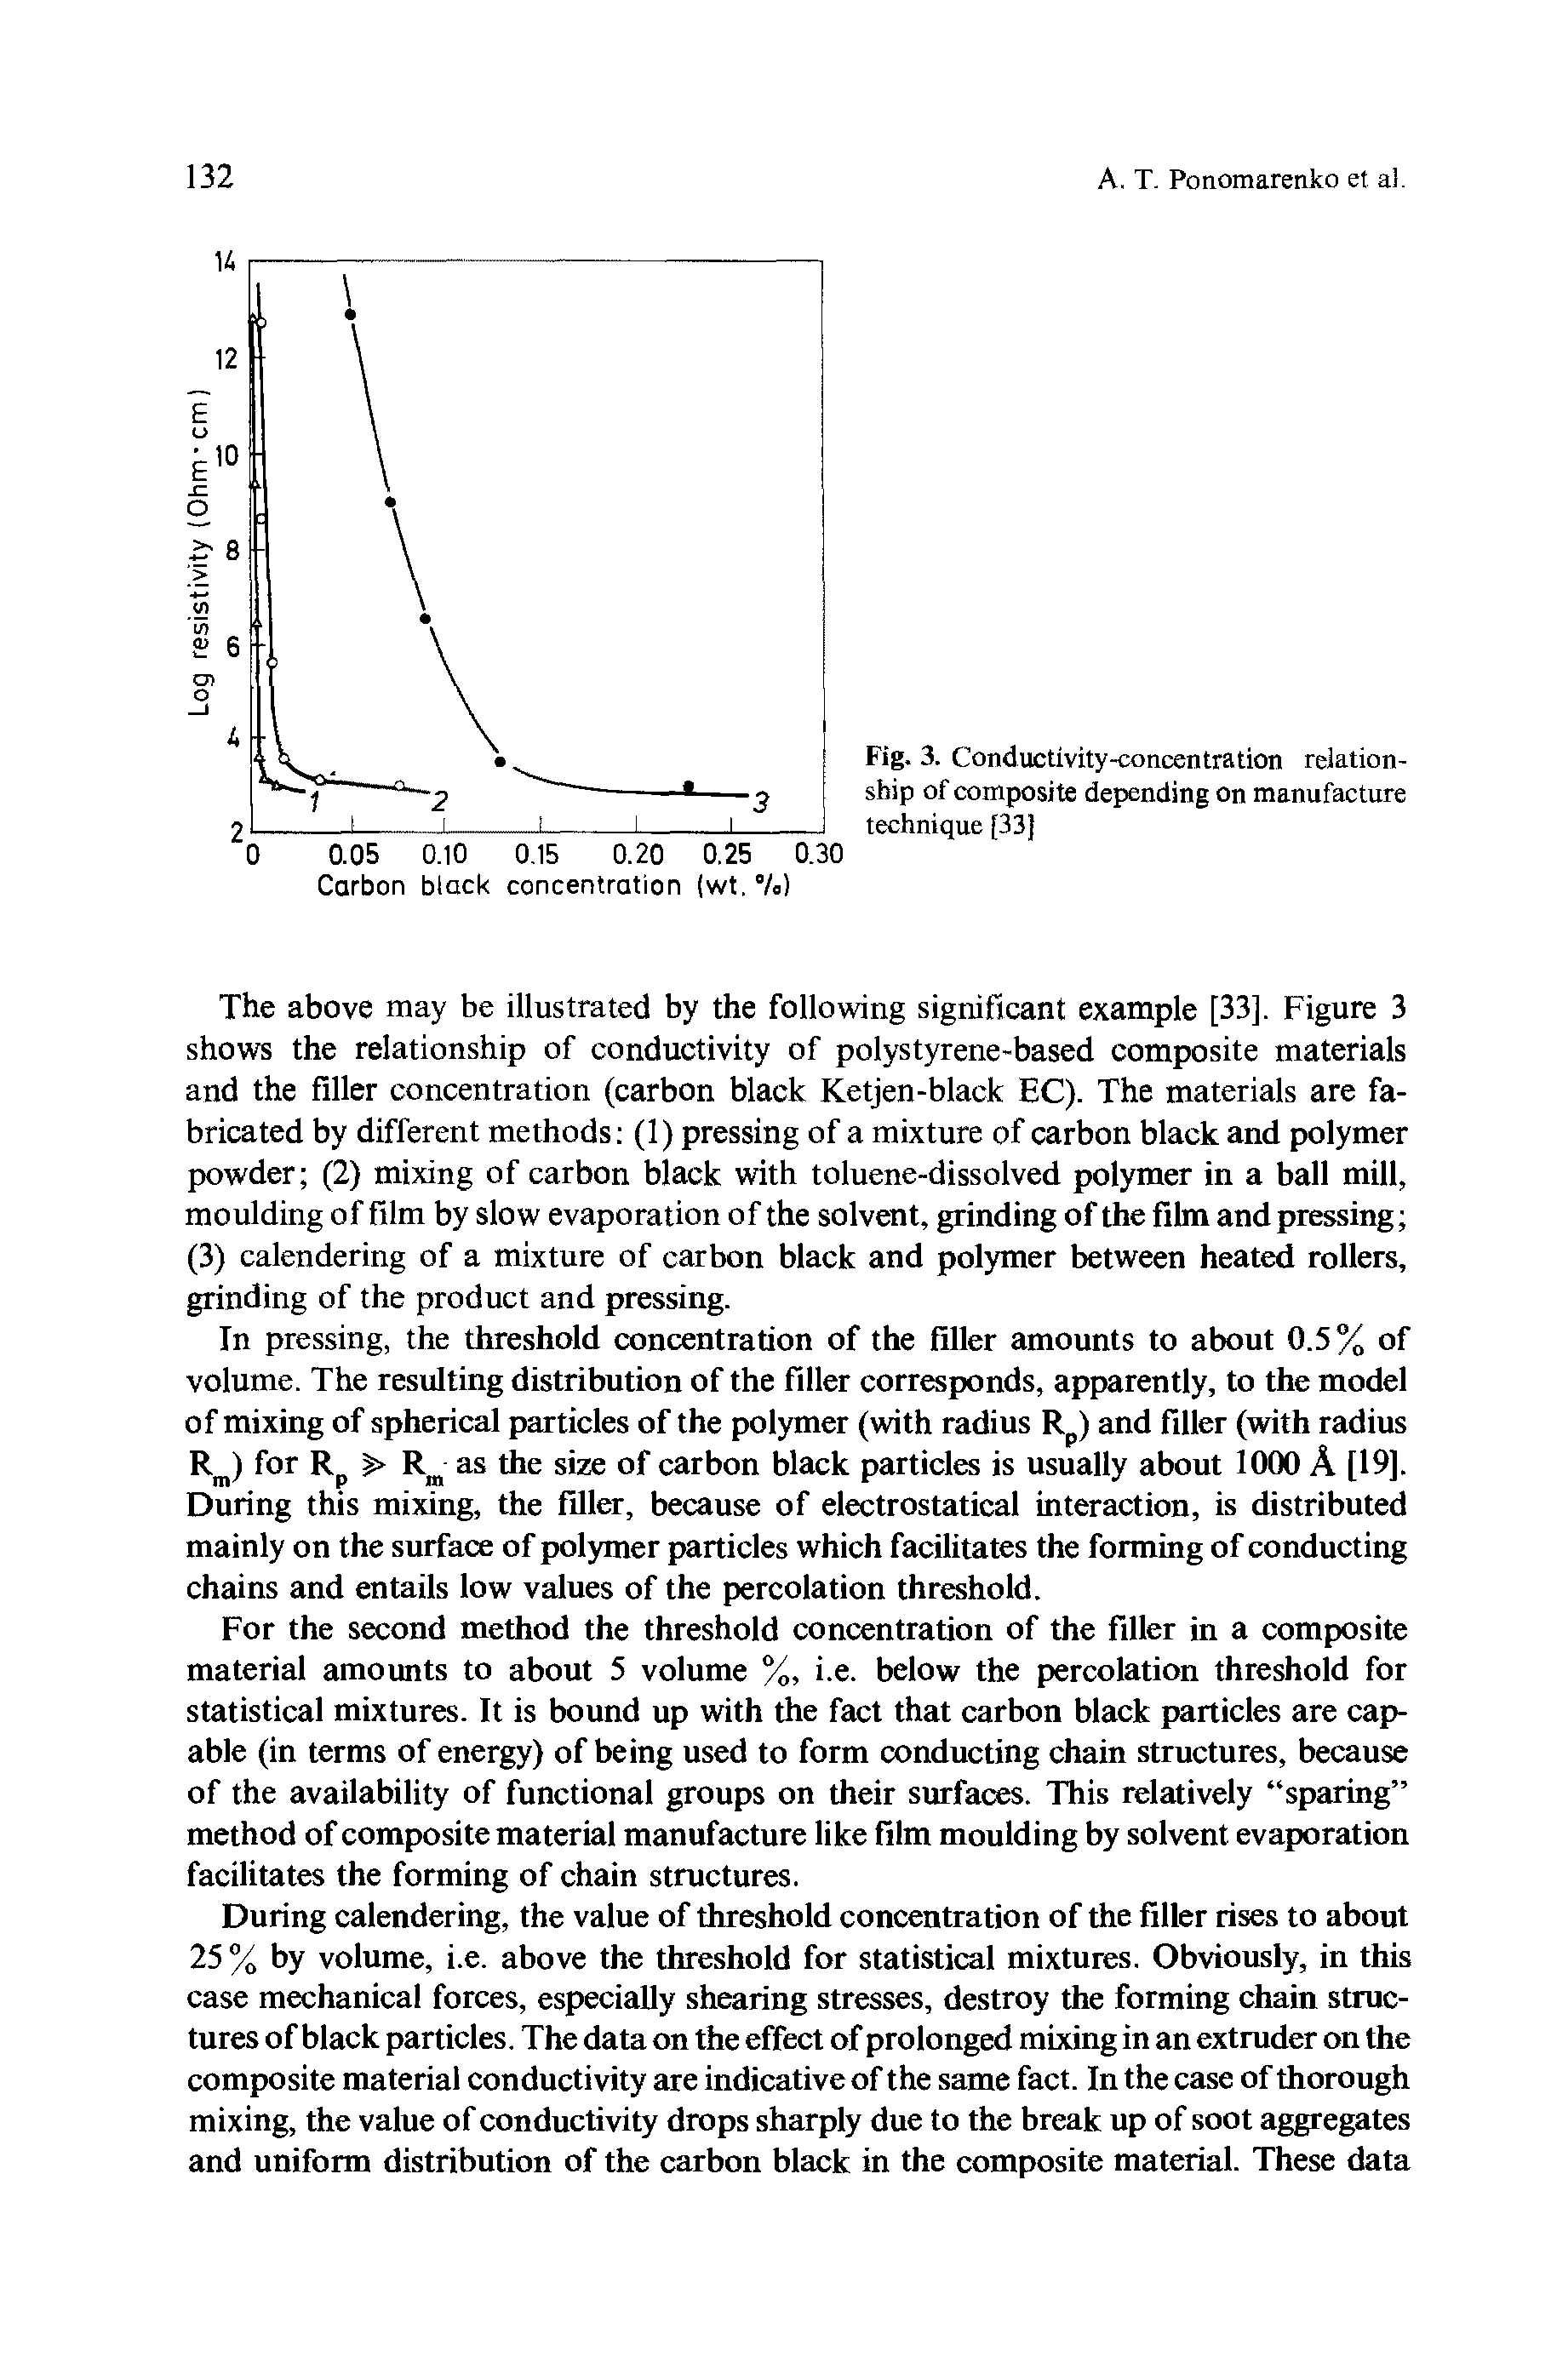 Fig. 3. Conductivity-concentration relationship of composite depending on manufacture technique [33)...